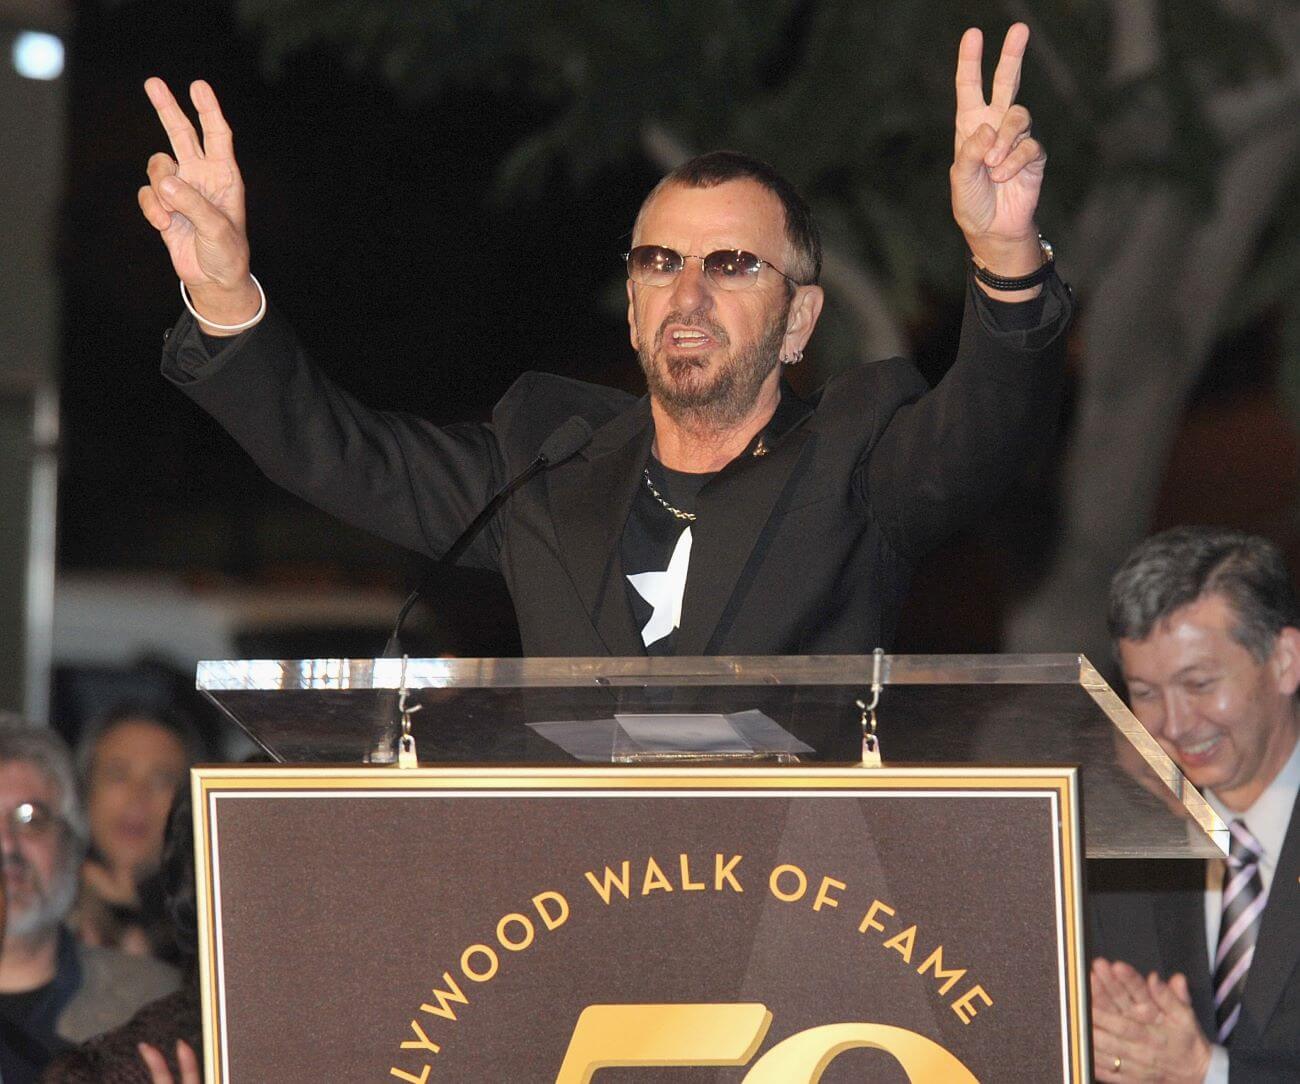 Ringo Starr holds up two peace signs at the Hollywood Walk of Fame